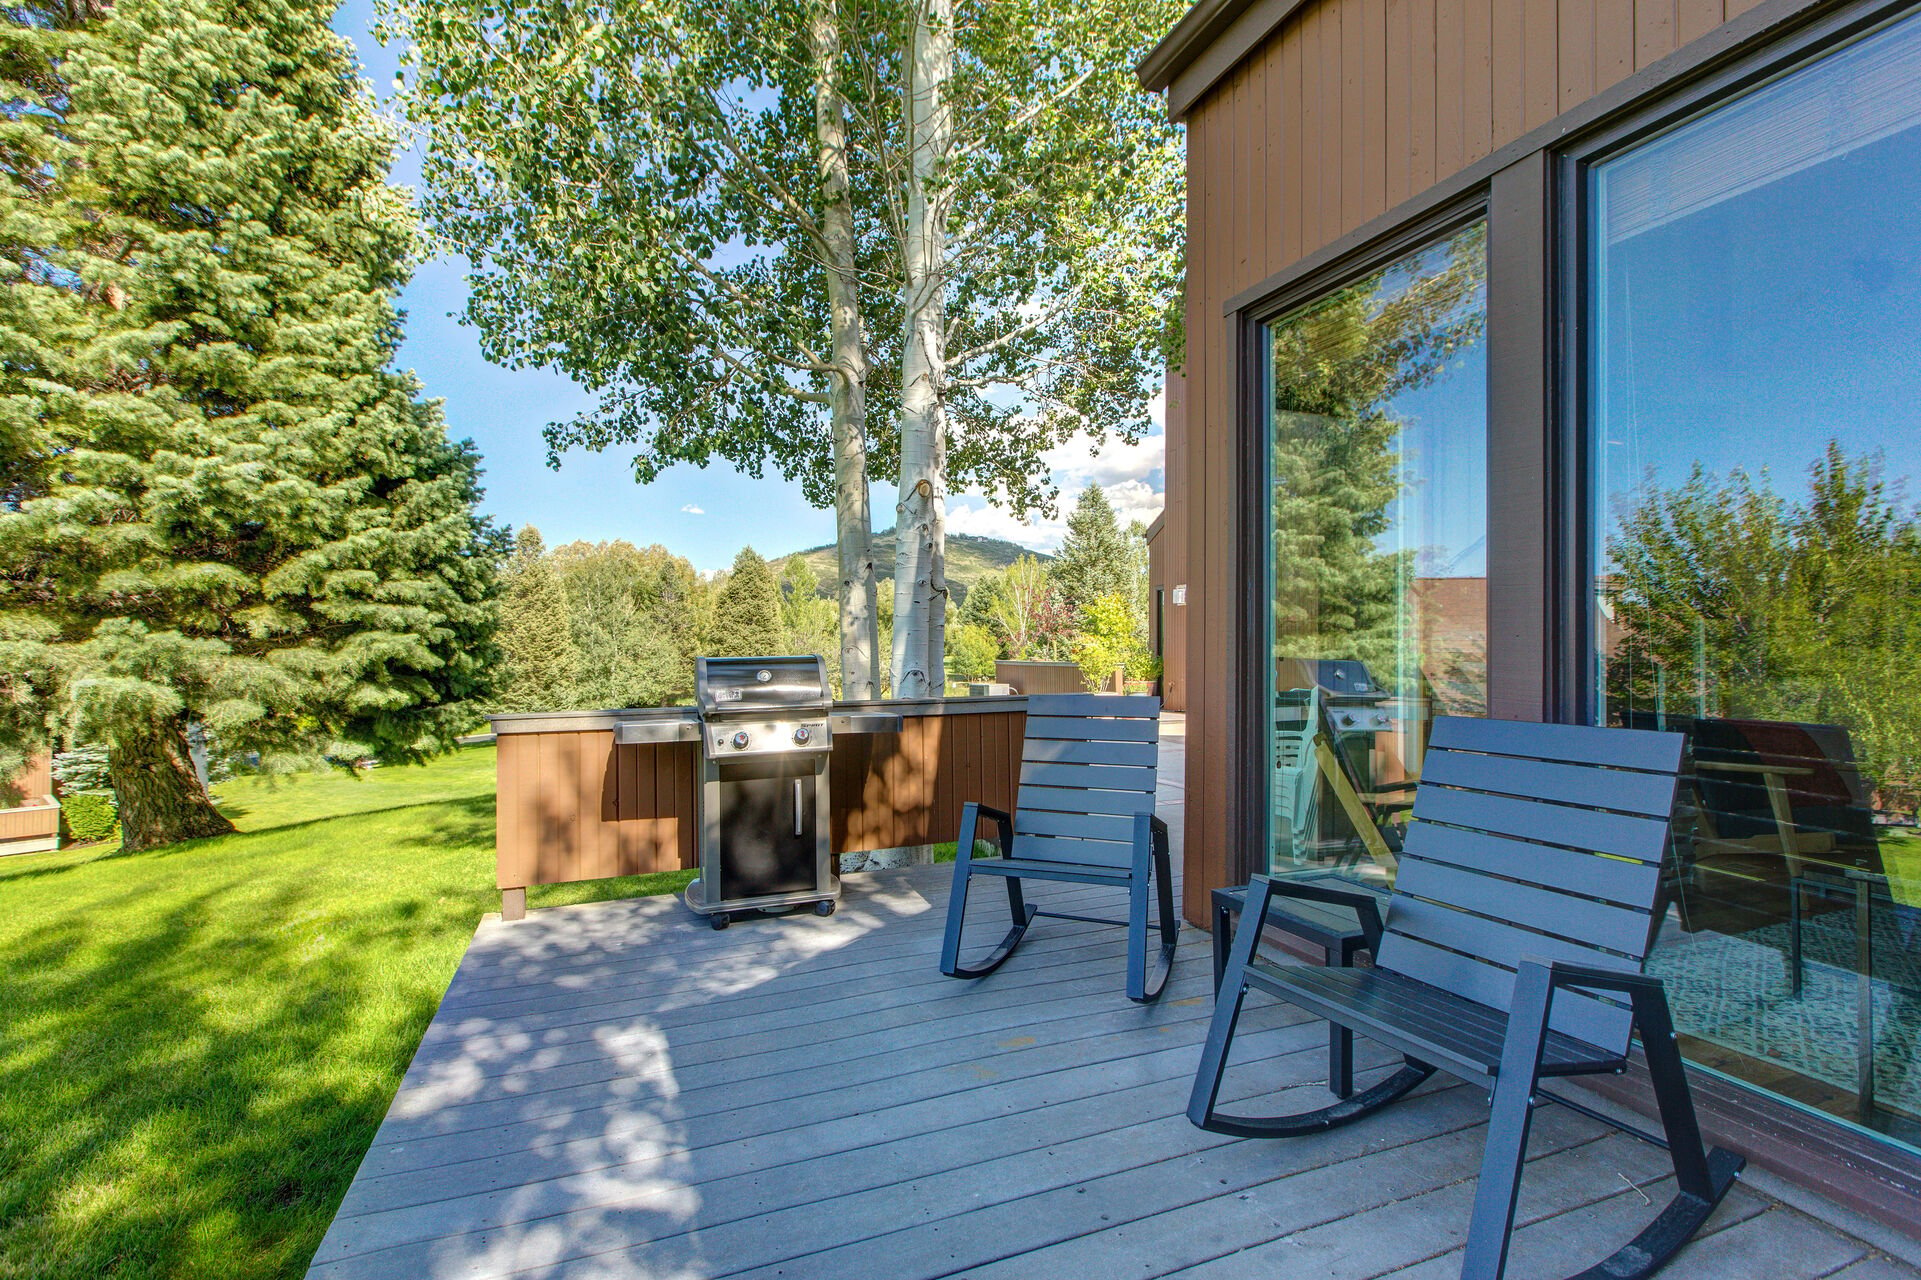 Private Back Patio with Propane BBQ and Rocking Chairs for Two